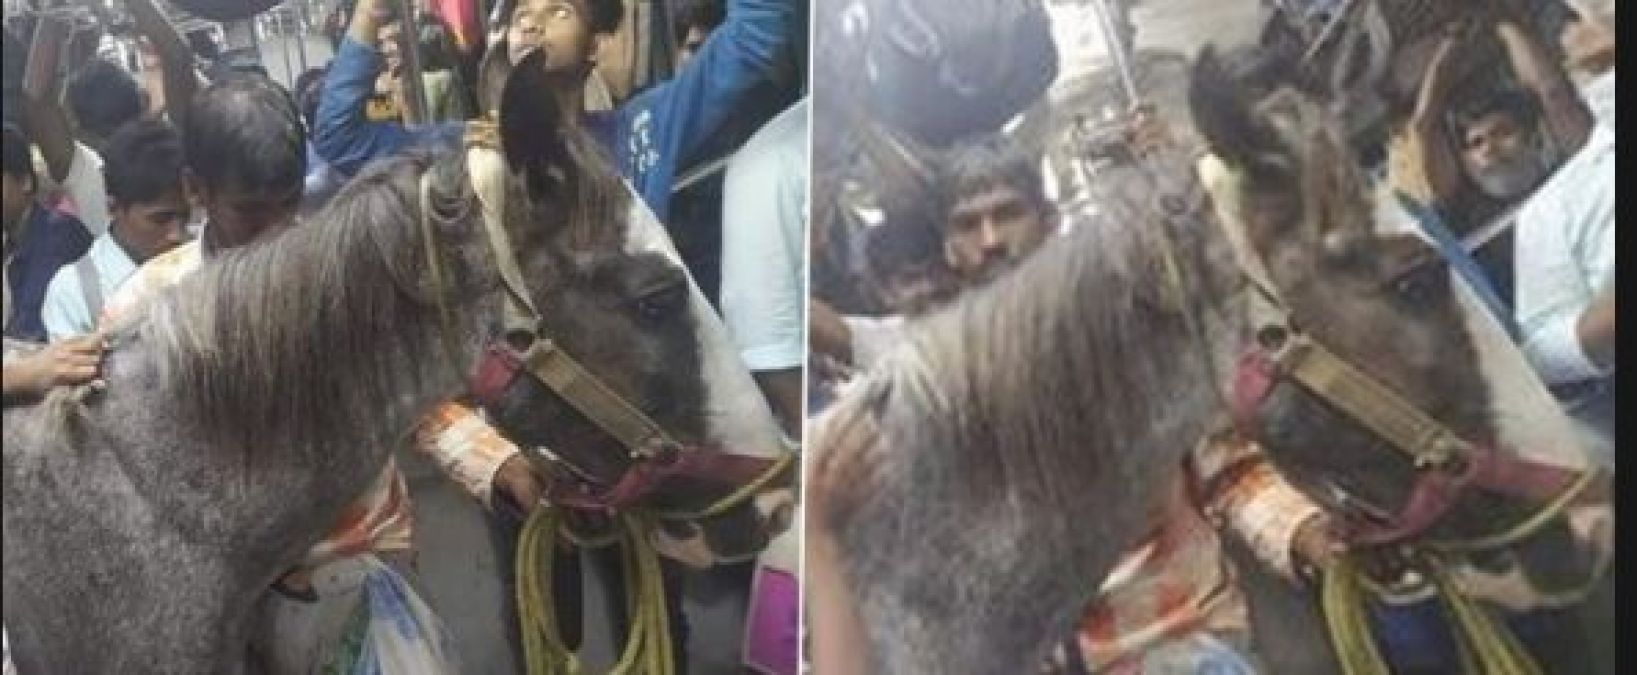 Horse travels in local train, railways said this when picture goes viral